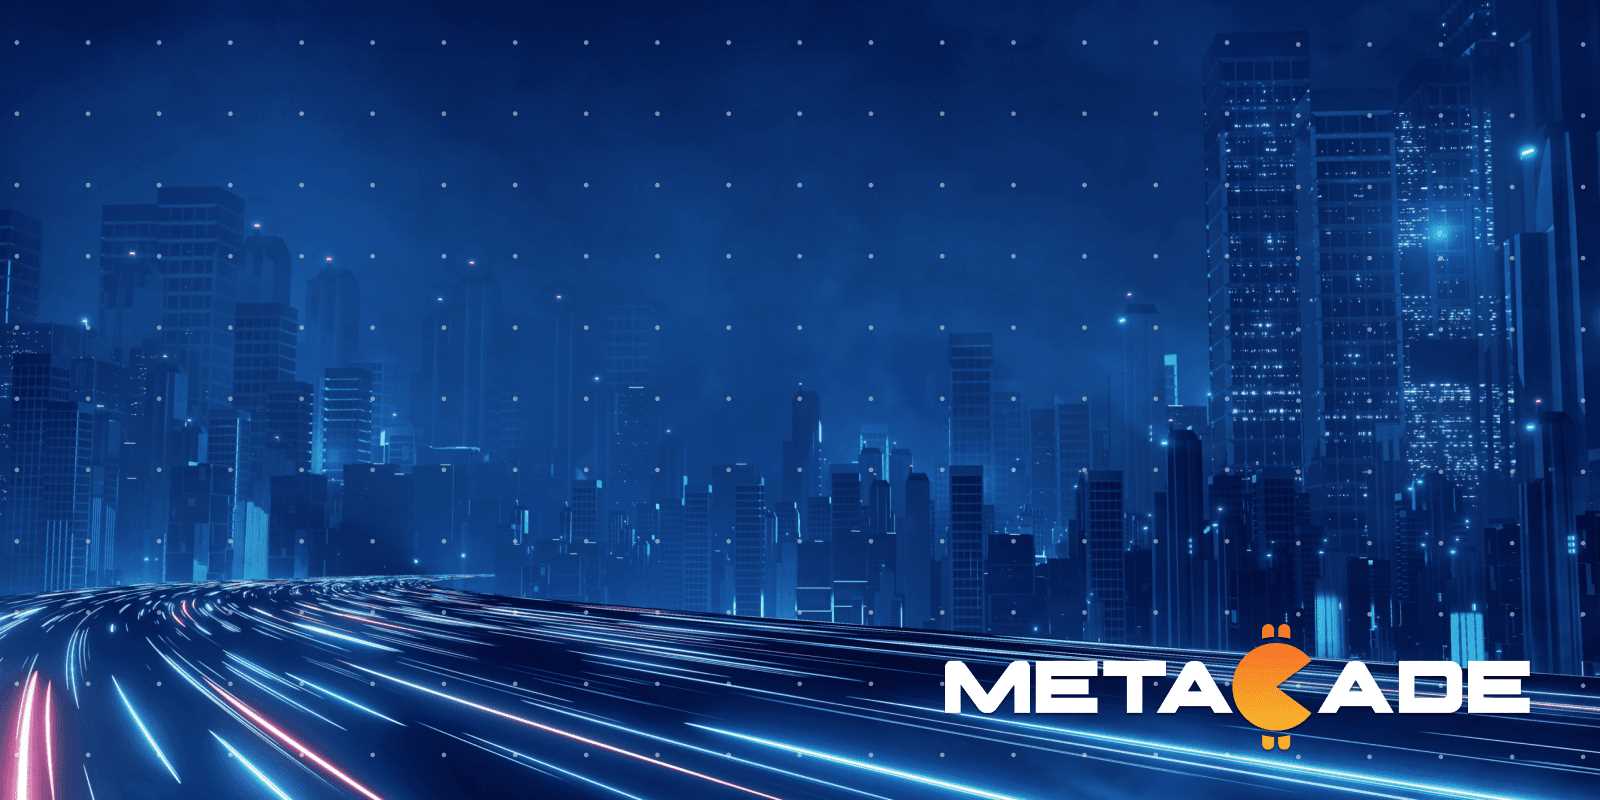 Can Metacade Overtake The Sandbox’s Price Prediction in 2023 and Beyond?